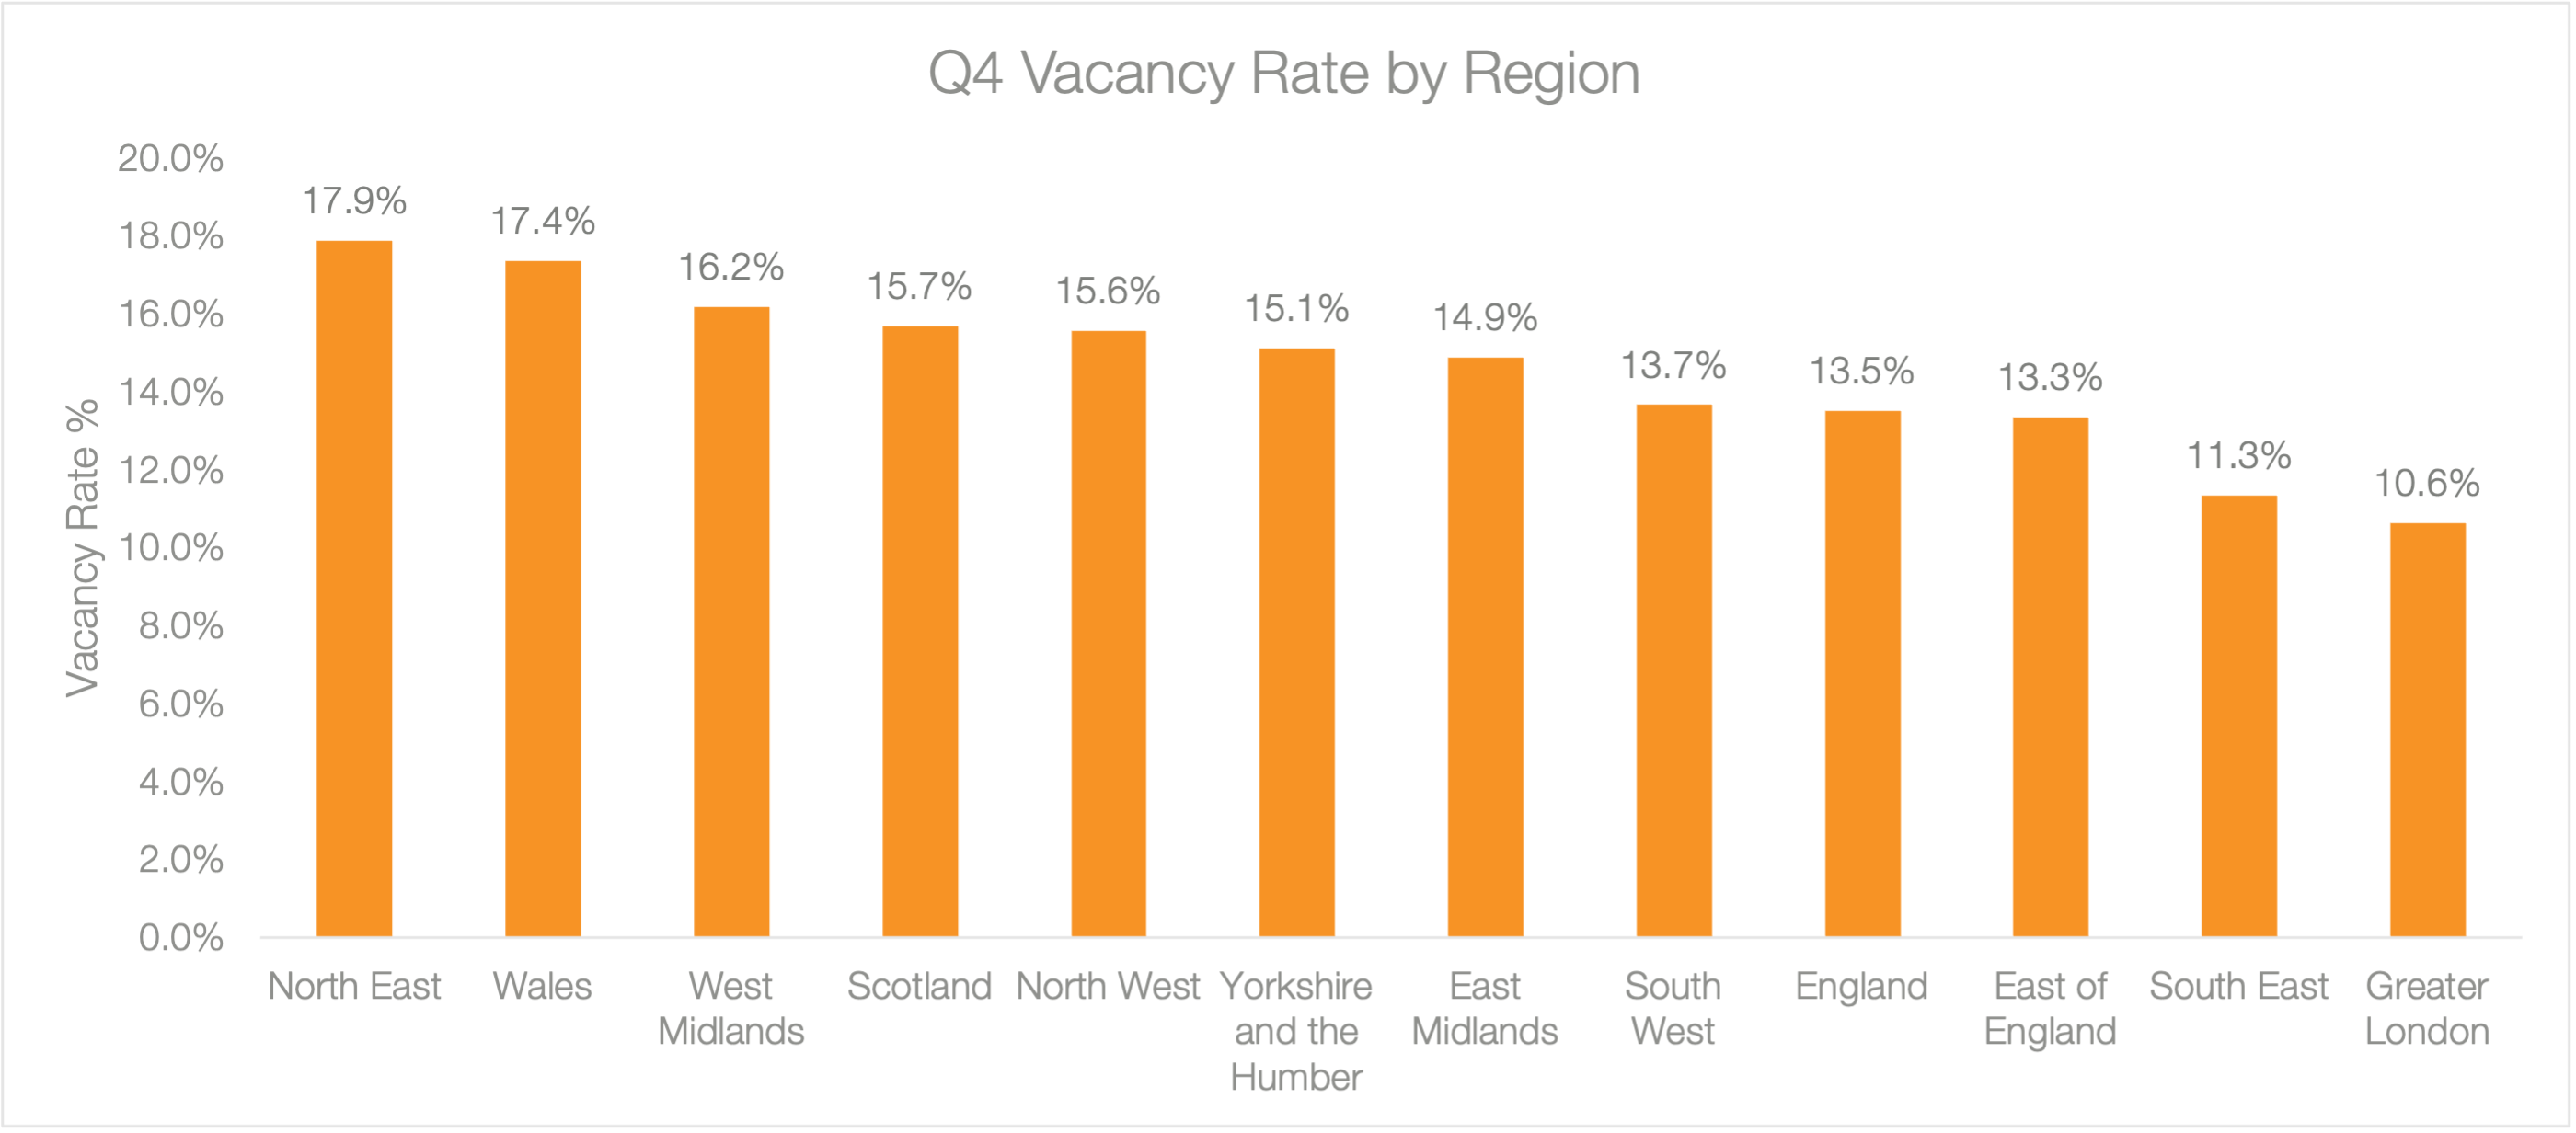 Q4 Vacancy Rate by region